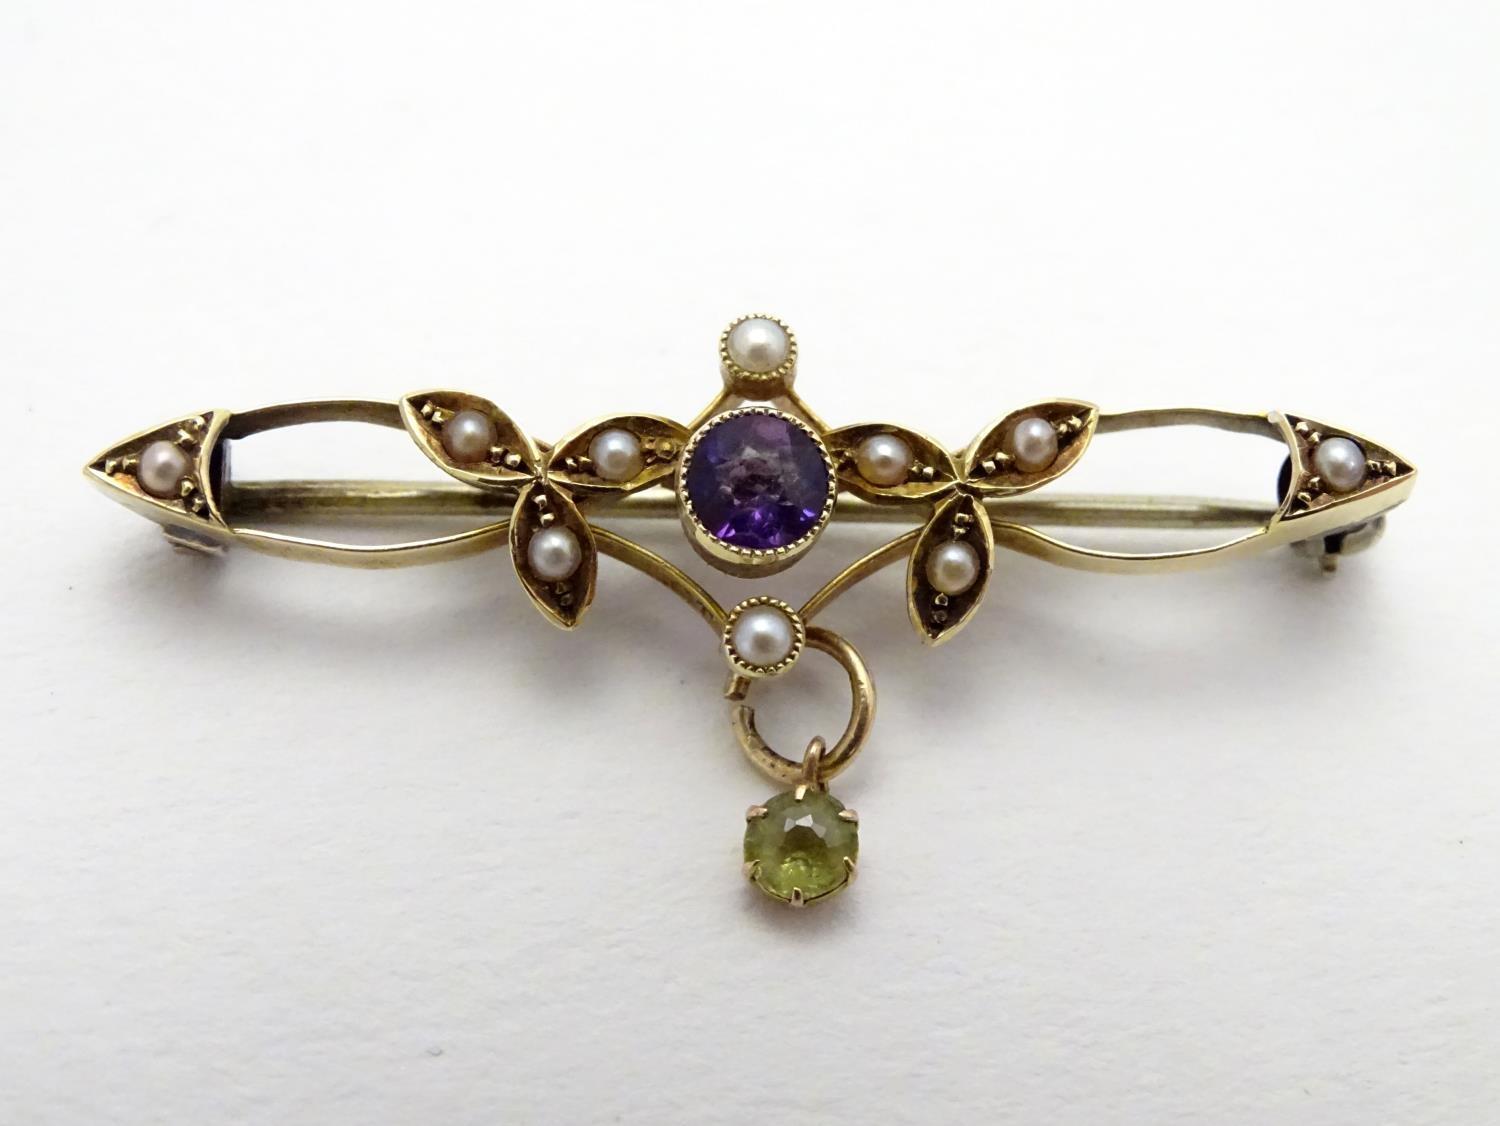 Suffragette jewellery : An early 20thC 15ct gold brooch set with amethyst, seed pearls and peridot (